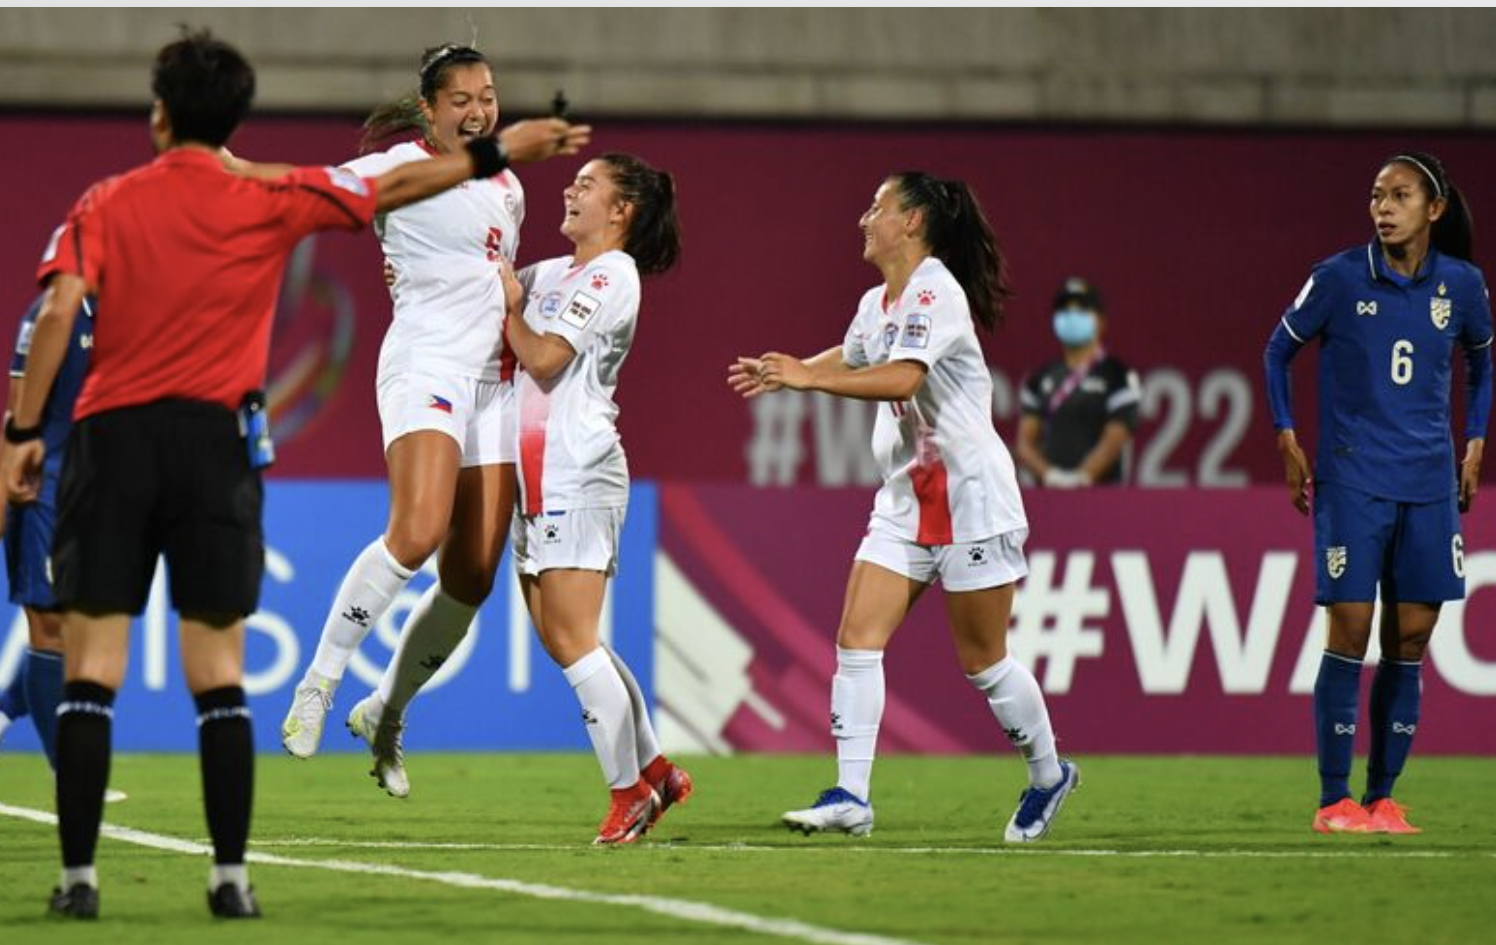 Philippines celebrates after scoring a goal over Thailand in the AFC Women's Asian Cup.